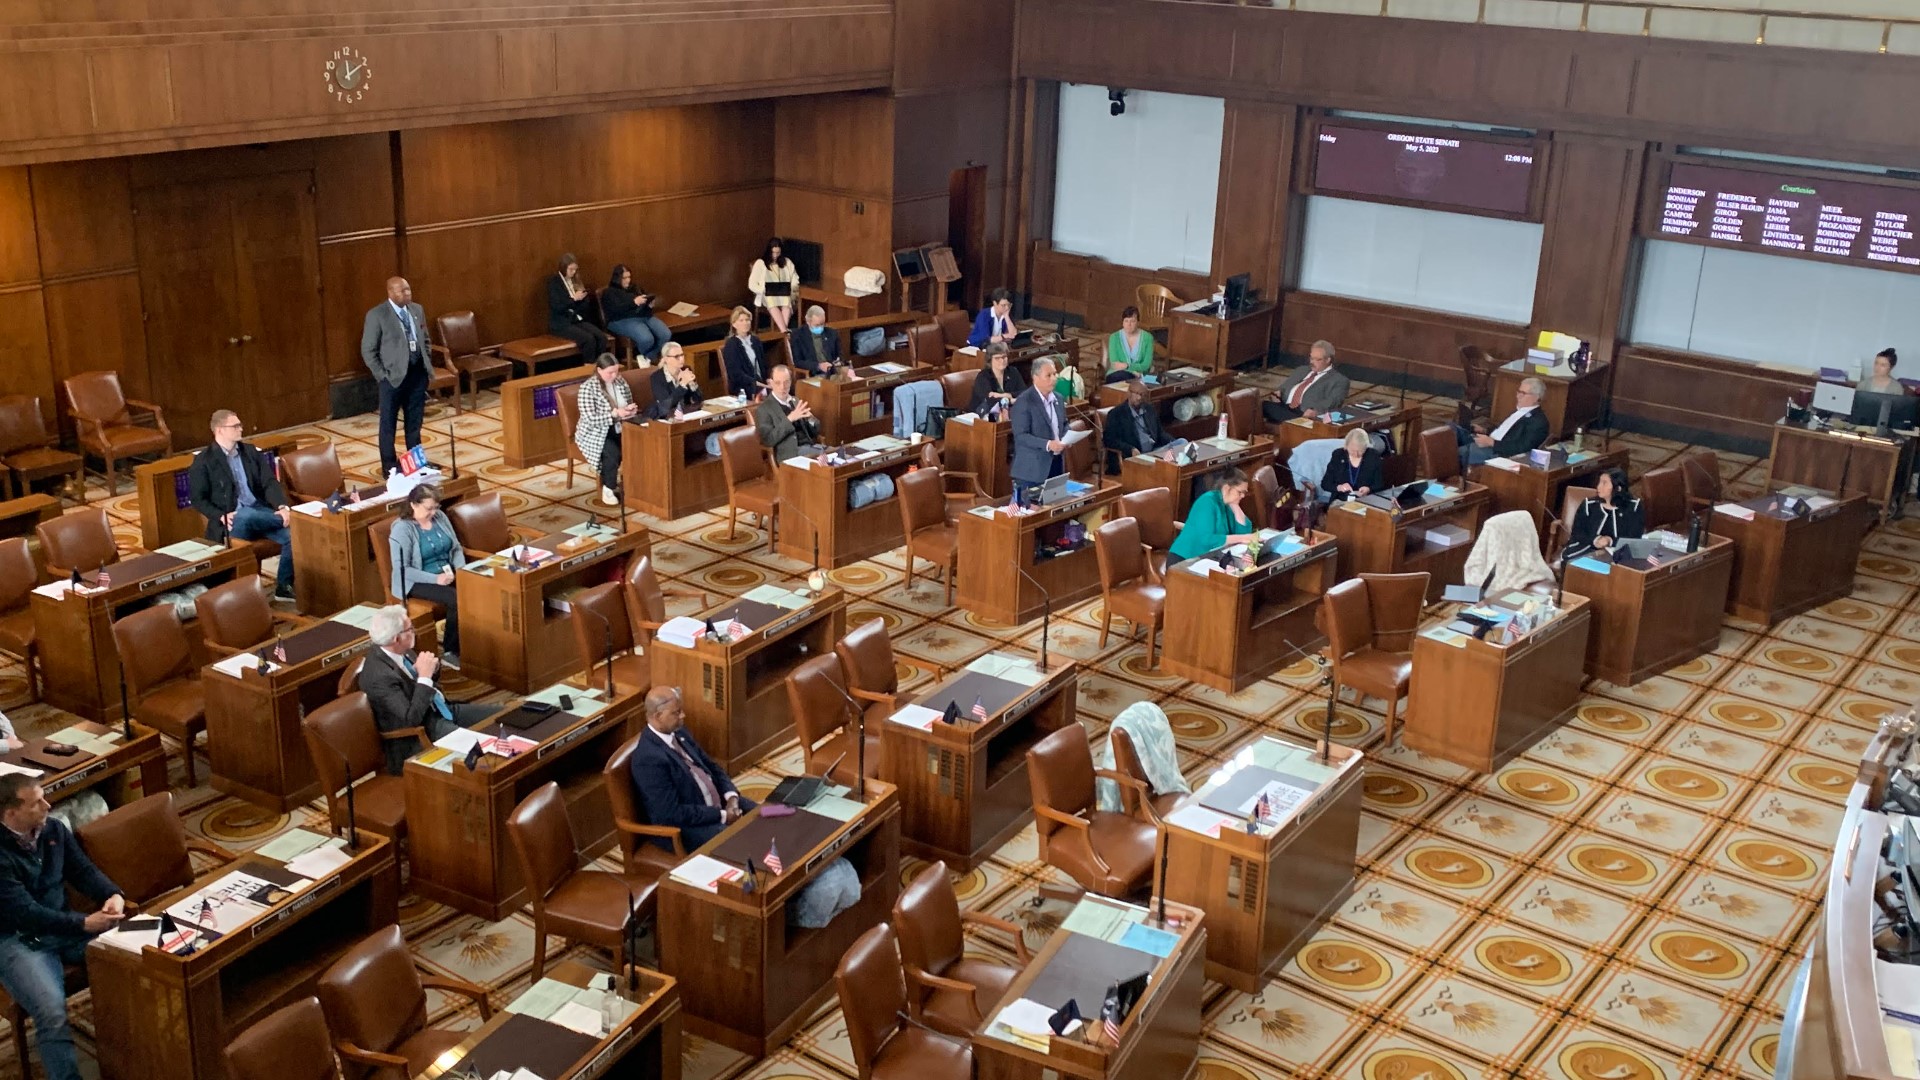 For a third day in a row, the Oregon State Senate could not move forward with its job as most Republicans once again didn't show up to work in the Senate chamber.